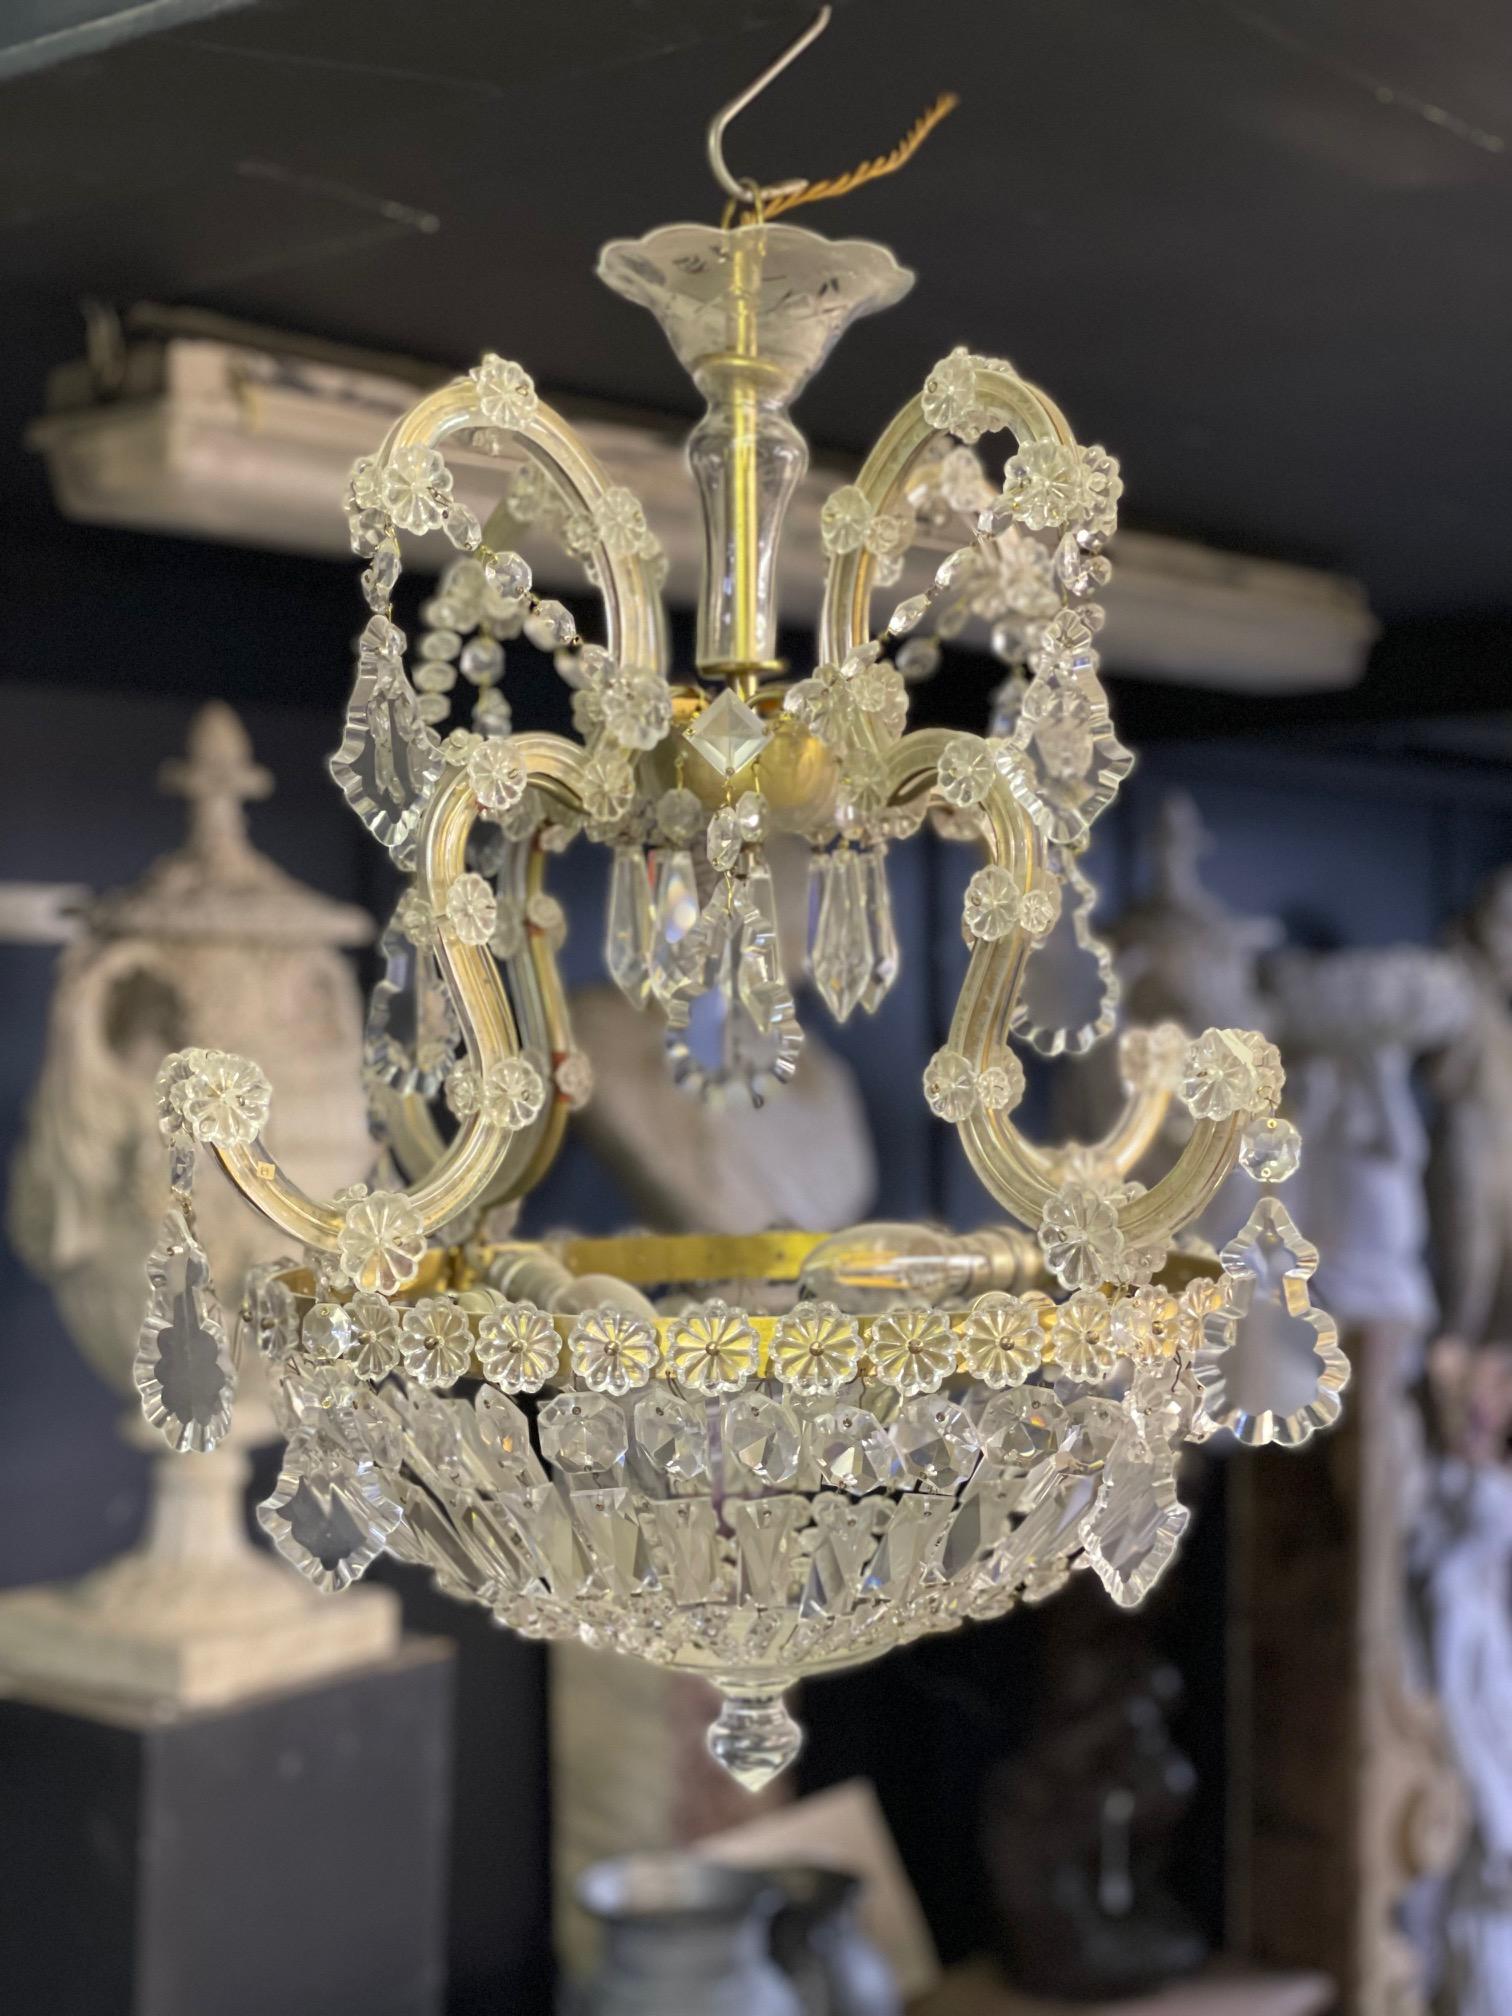 A very elegent pair of 20th century bag and tent style Marie Therese Chandeliers.

Can be sold seperately.

Removed from a private estate in Chingford Essex, United Kingdom.

